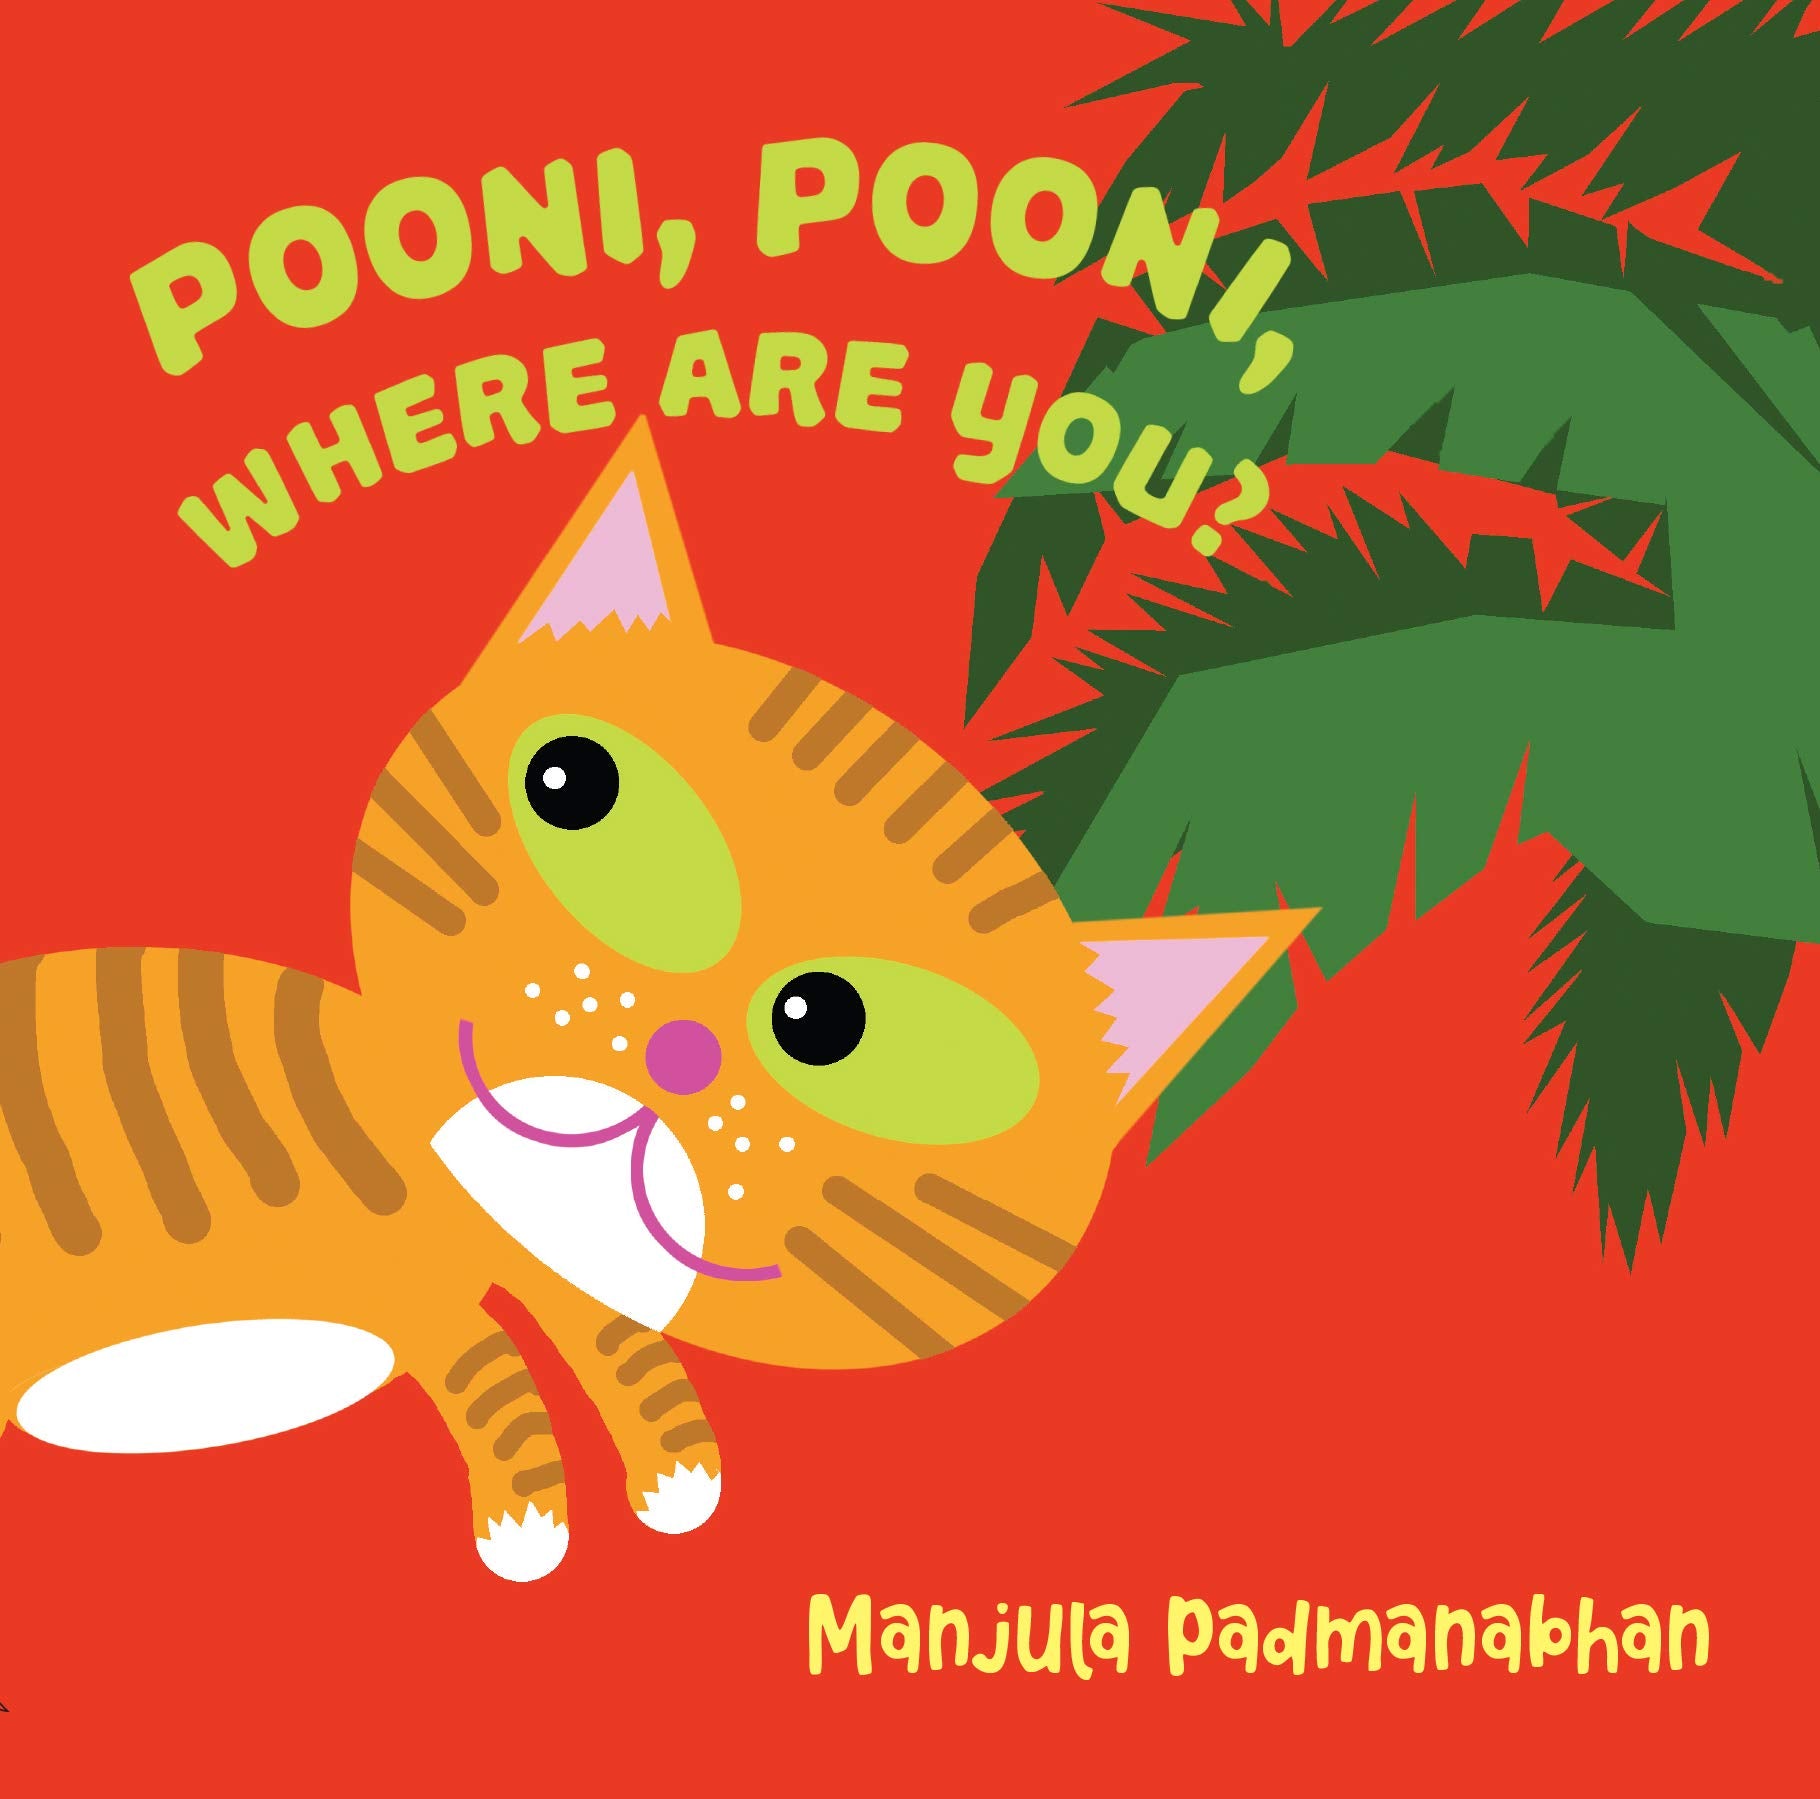 Pooni, Pooni, Where Are You?